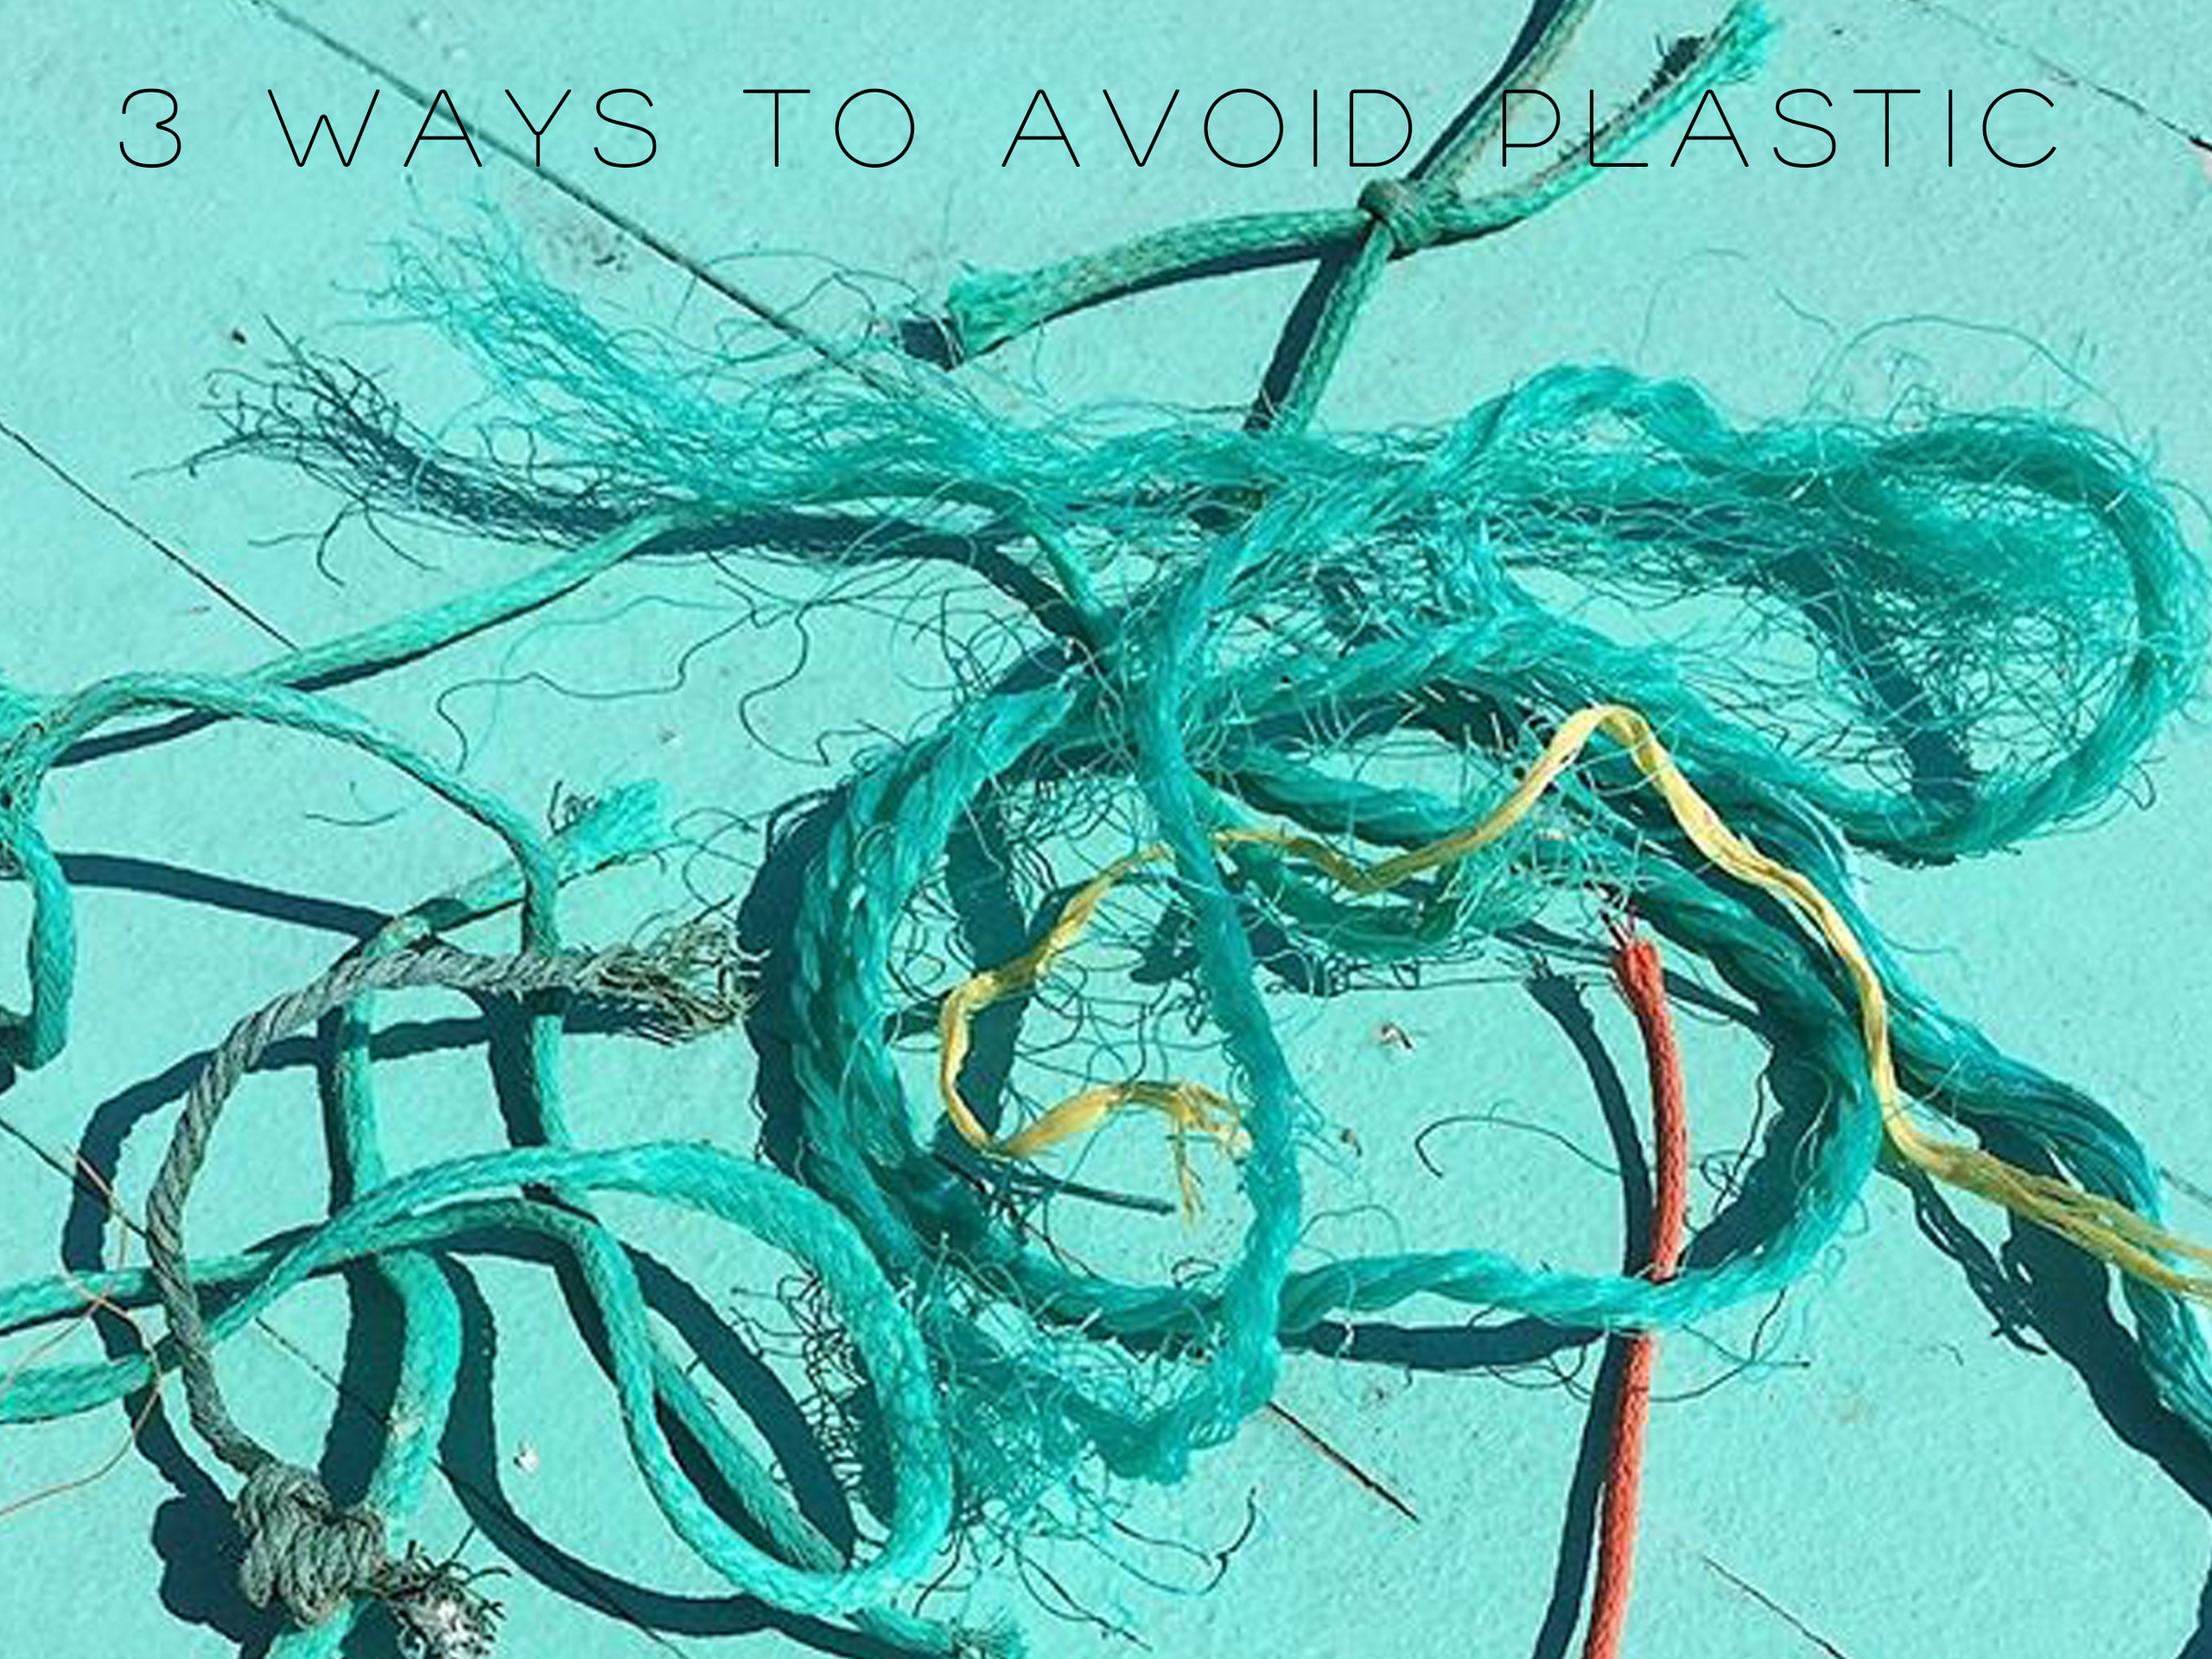 Euphoric Threads Plastic Pollution tips to avoid plastic and eco living plastic free july